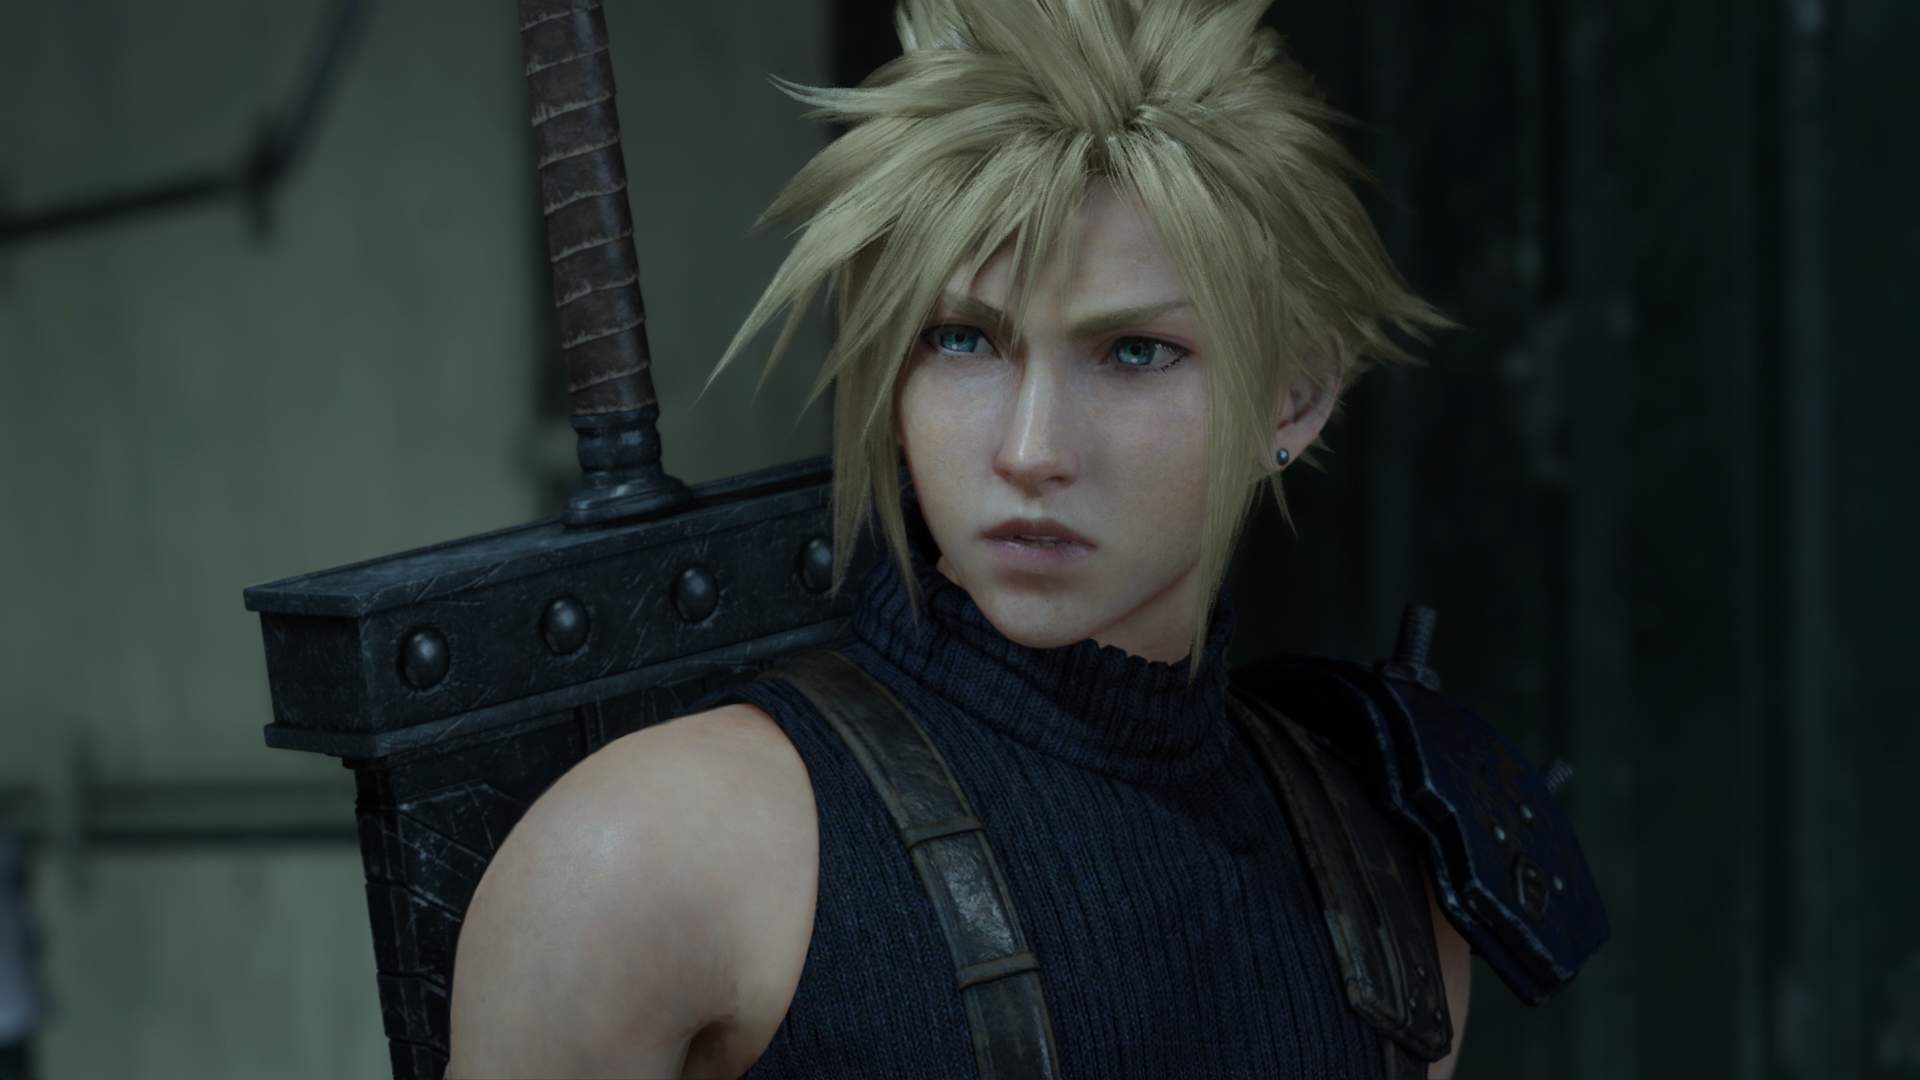 Meet Cloud Strife In The Latest Final Fantasy Vii Remake Trailer Square Enix Blog 